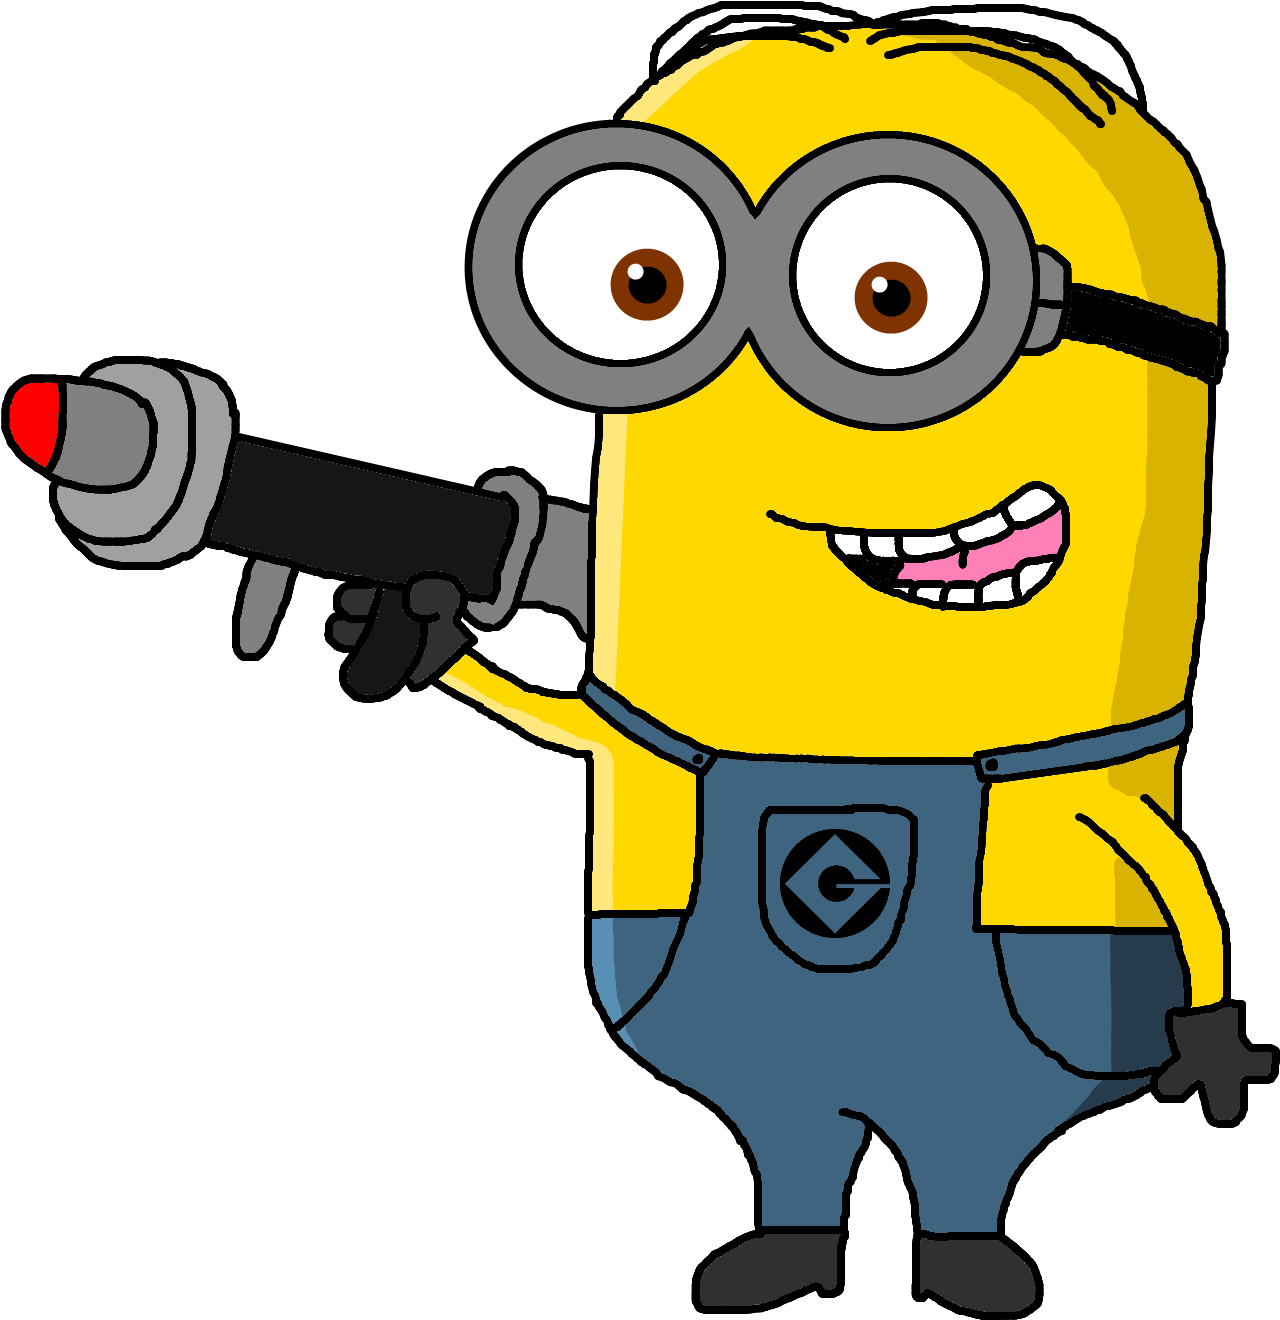 Dave The Minion In Mycun The Movie - Minions 2d Png (1307x1342)